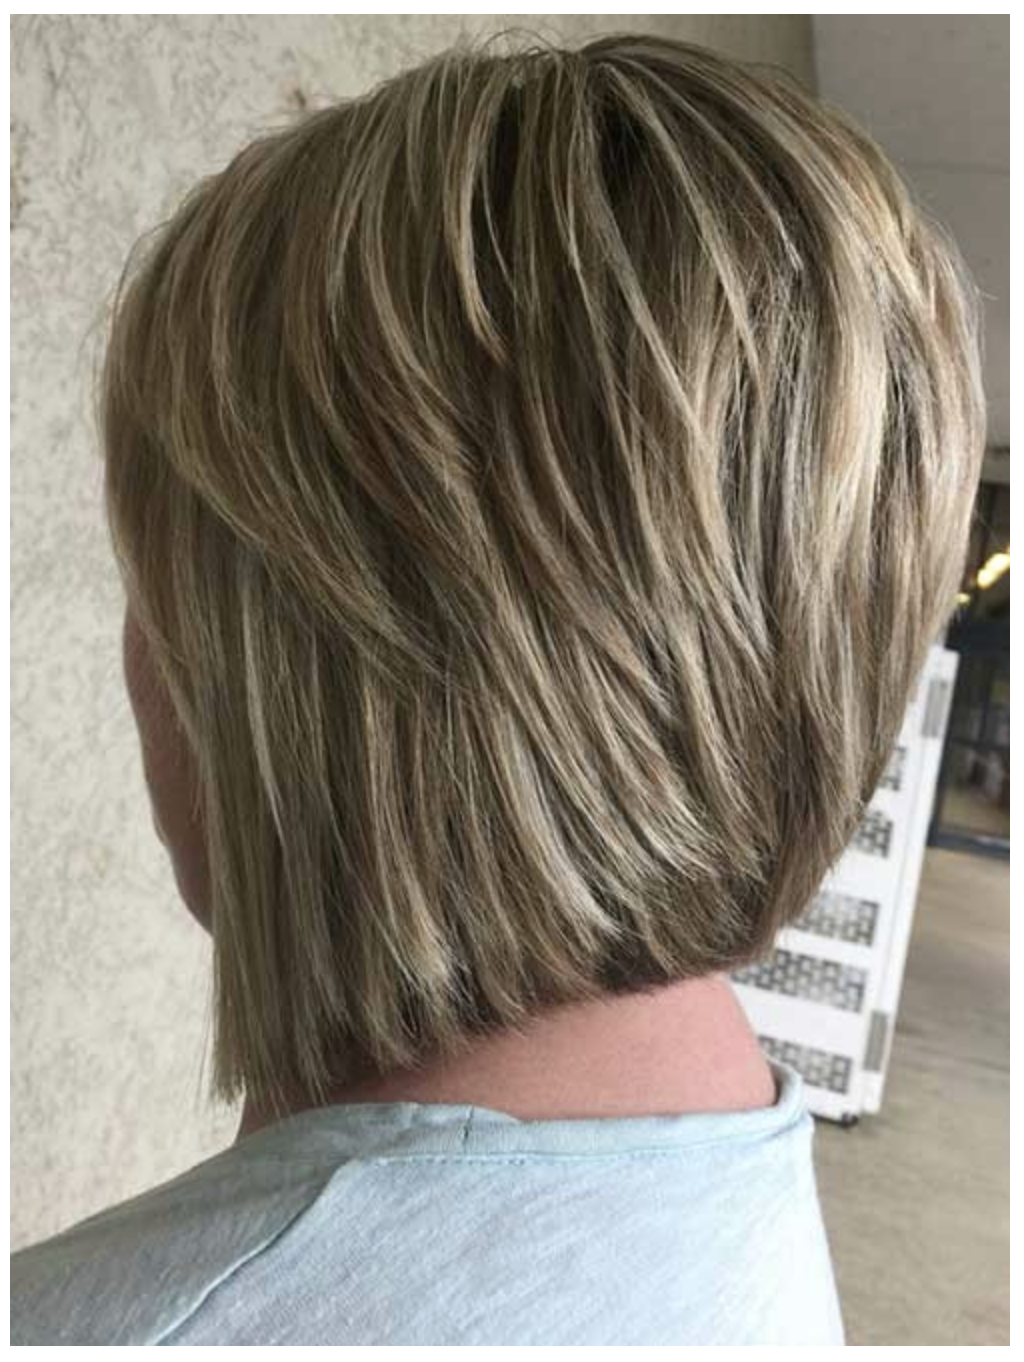 2020 Short Layered Haircuts for Women Over 50 - Younger ...